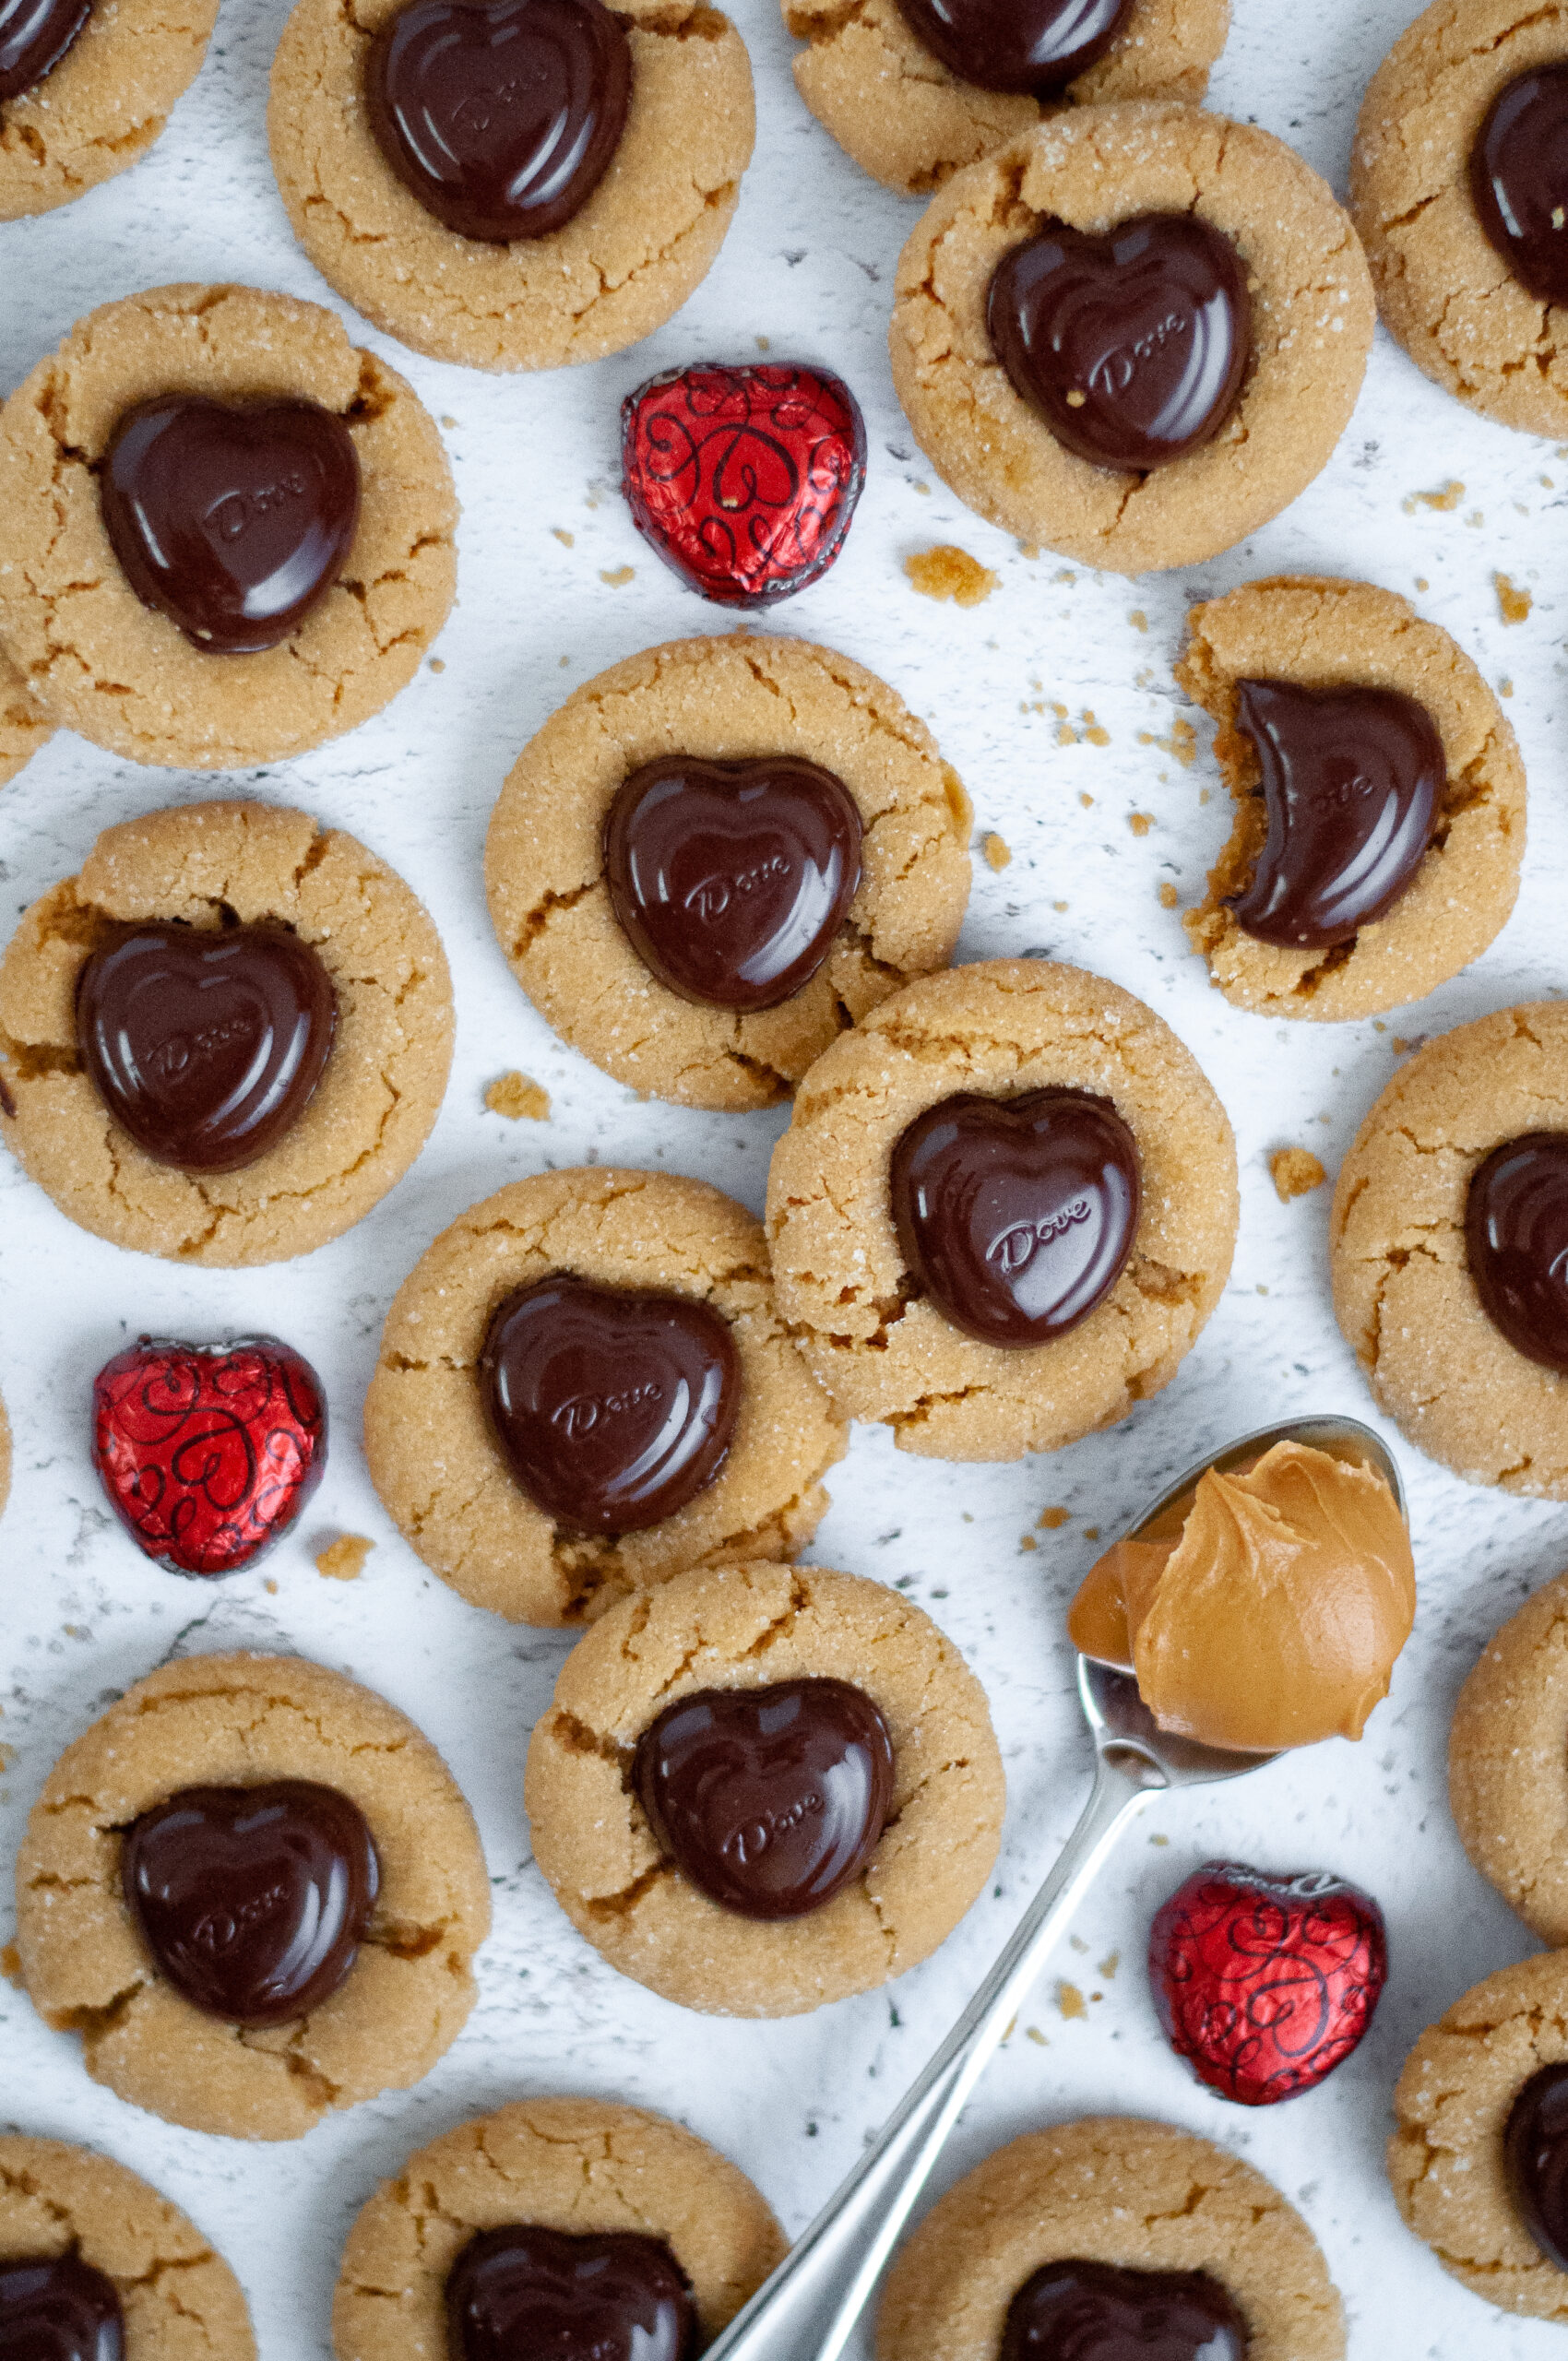 Top down view of these peanut butter blossom cookies with cookie crumbs, a spoonful of peanut butter, and extra heart-shaped chocolates